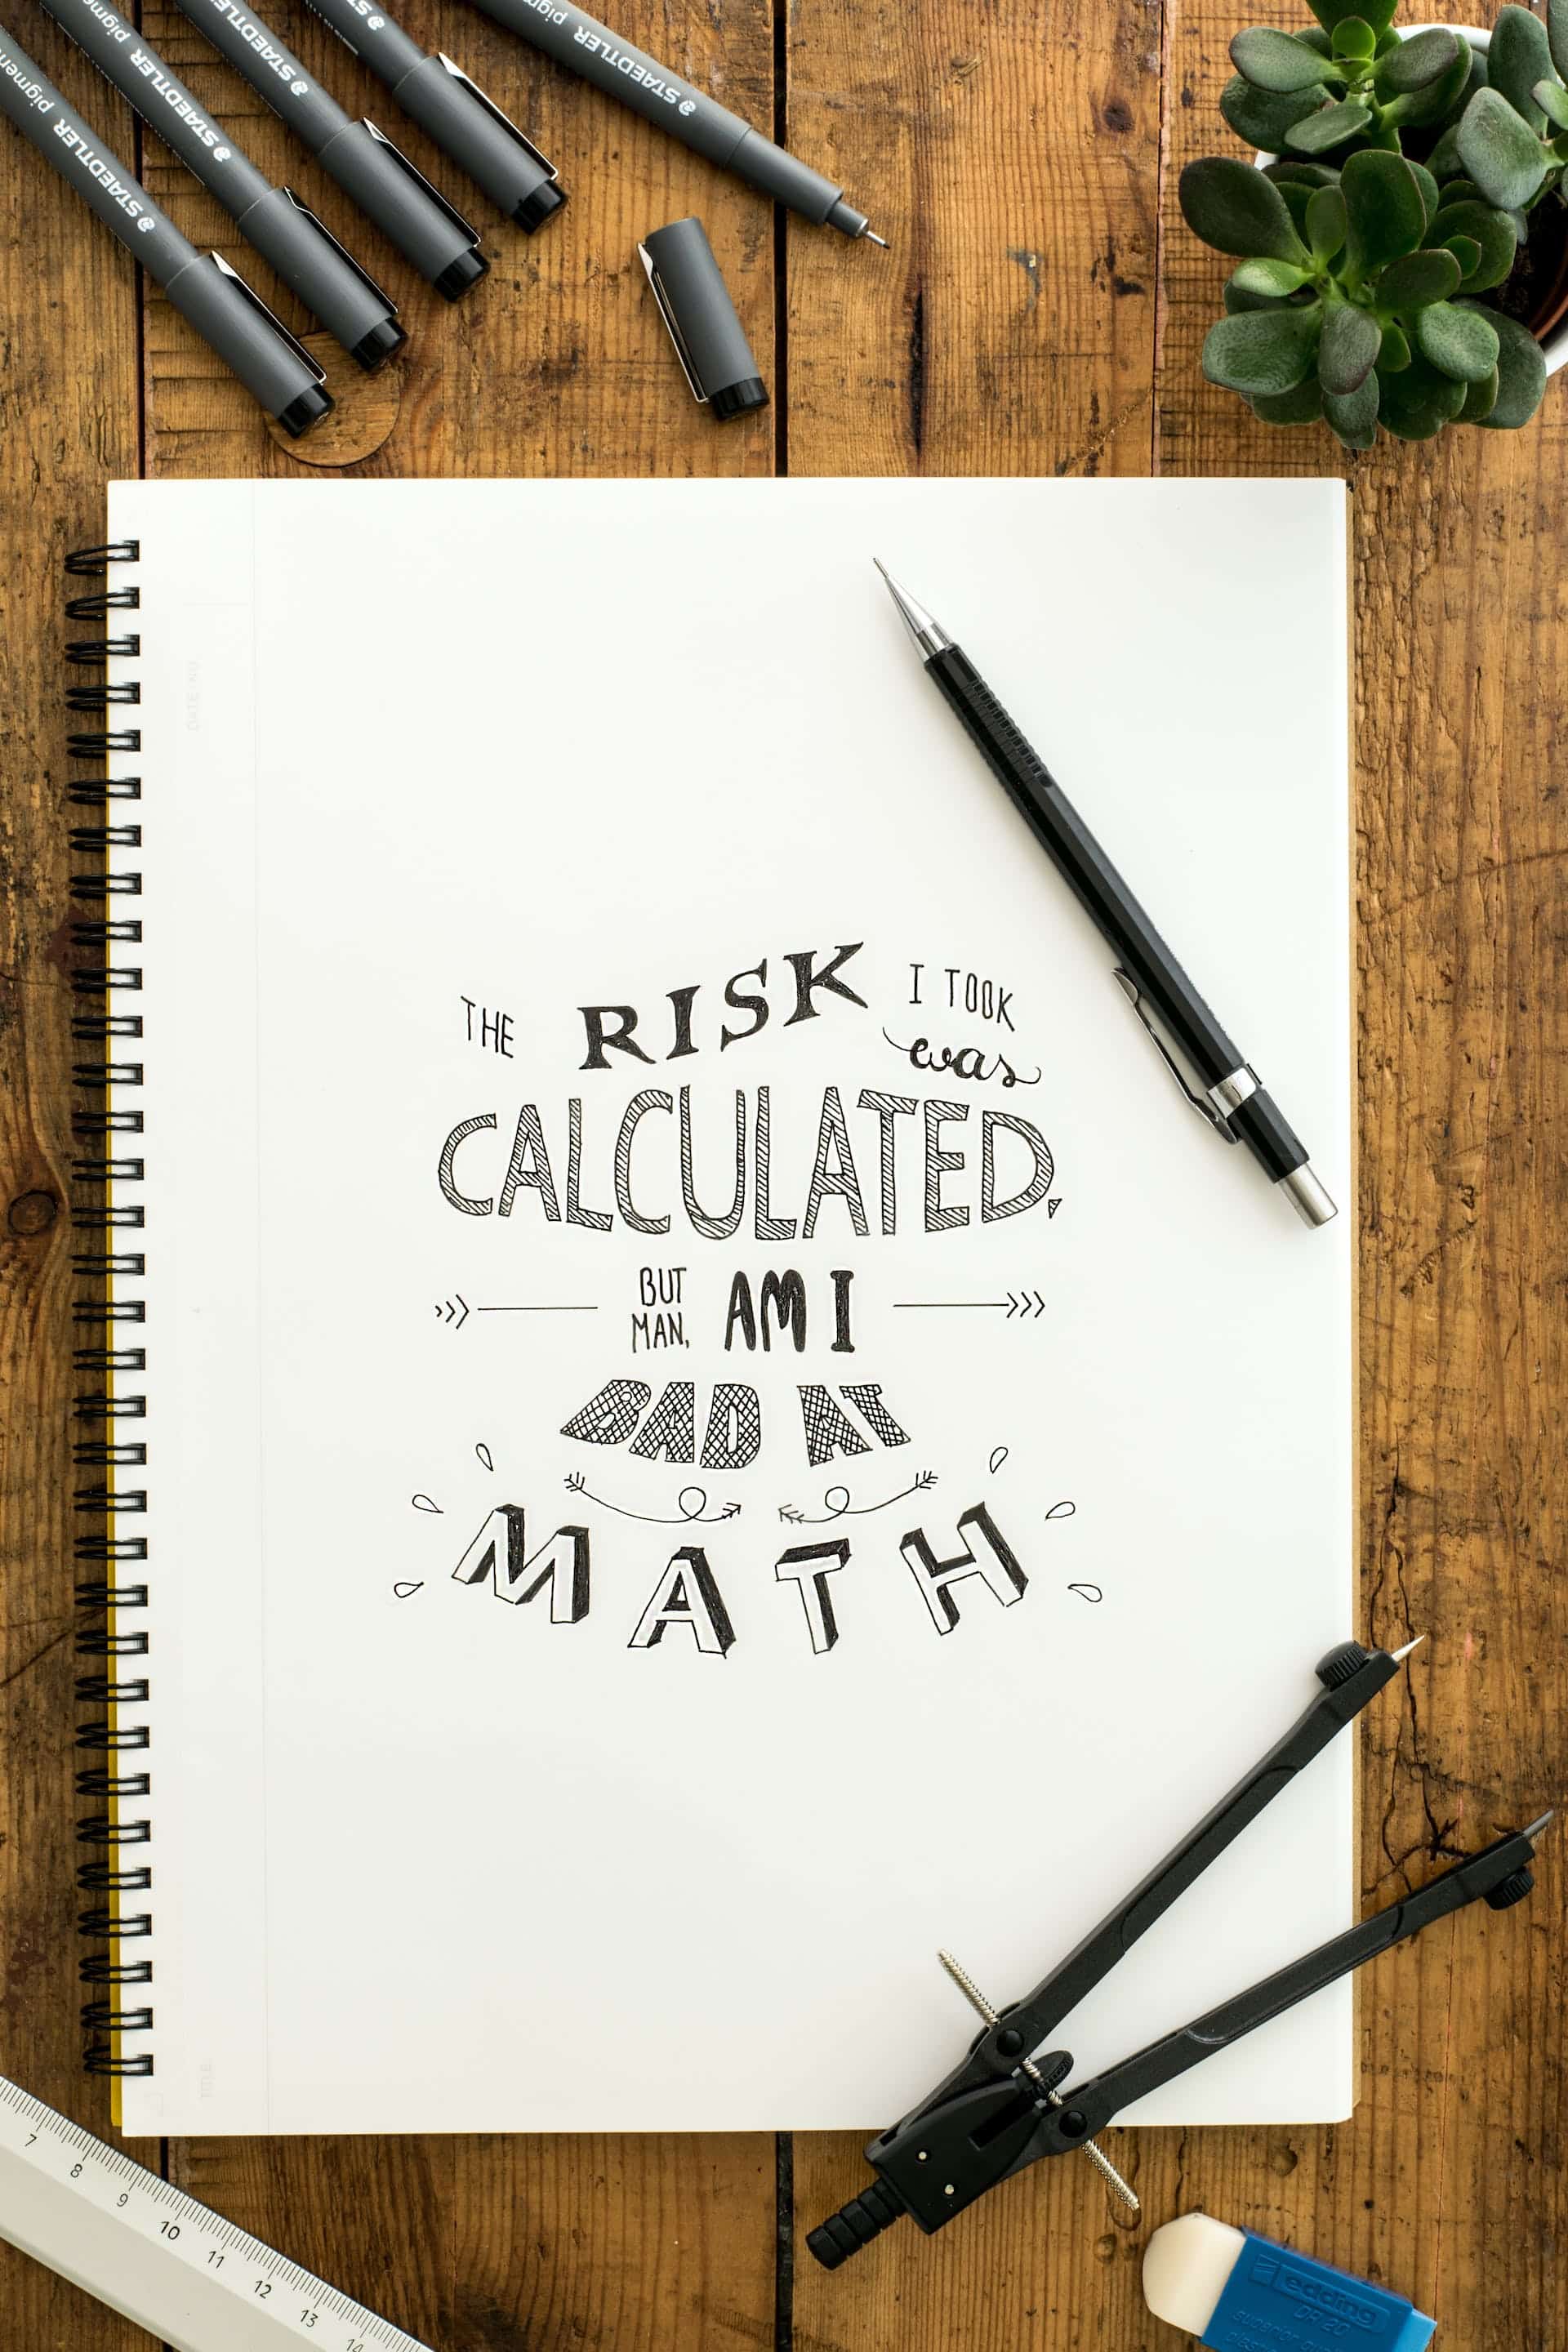 A sketch book lays on a table with pens surrounding it. Written in calligraphy on the sketch book's page is "The risk I took was calculated but man am I bad at math".